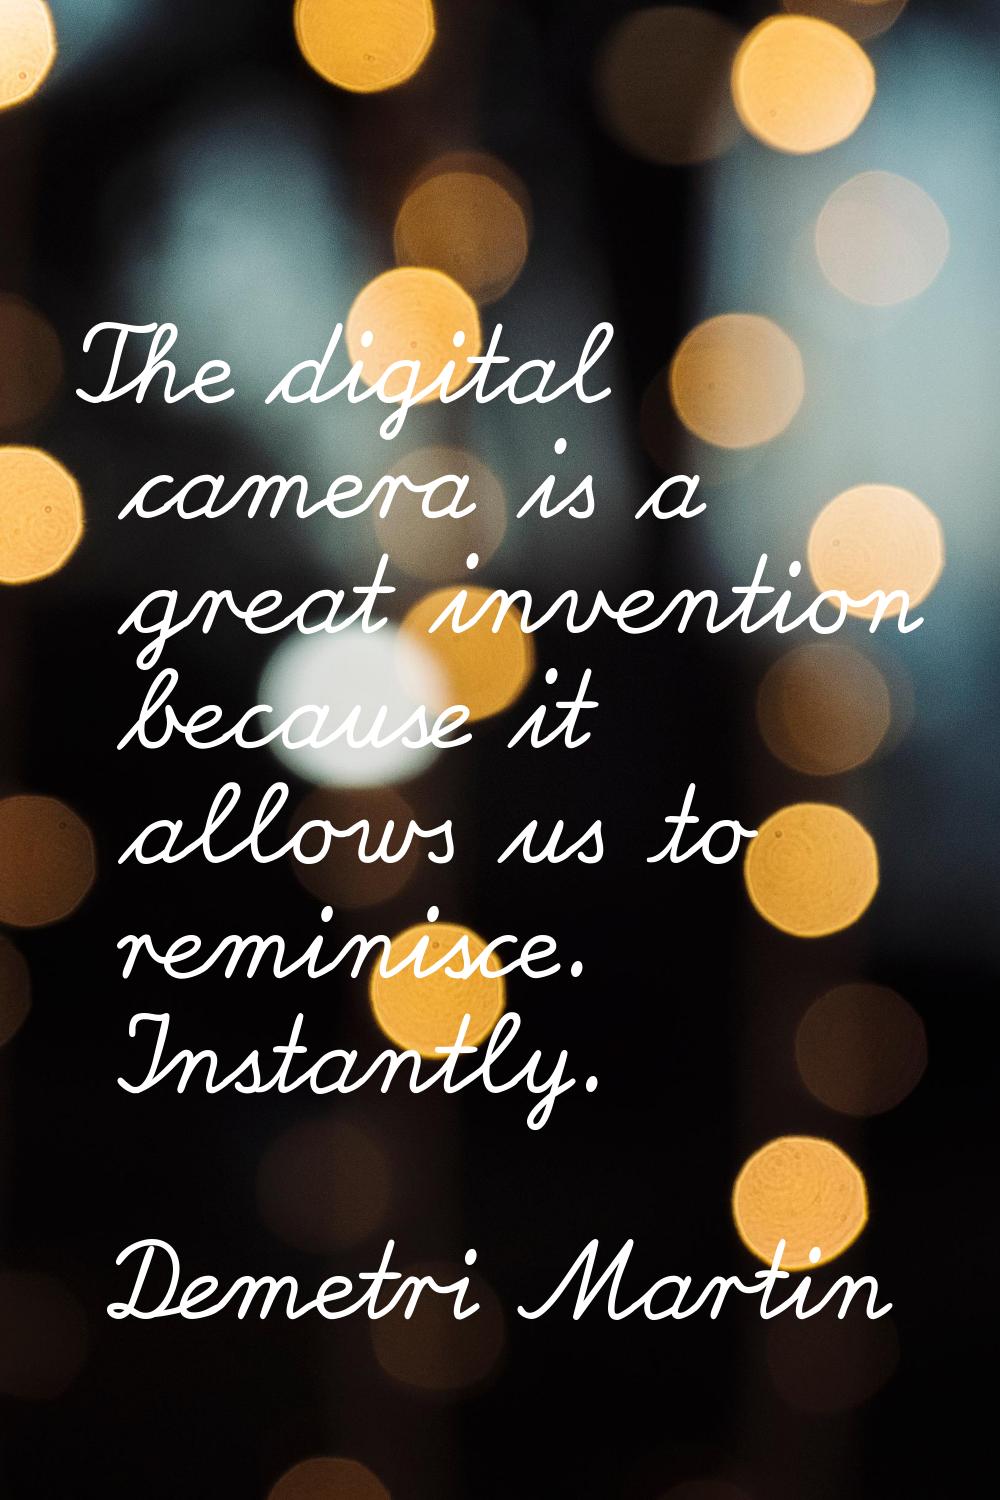 The digital camera is a great invention because it allows us to reminisce. Instantly.